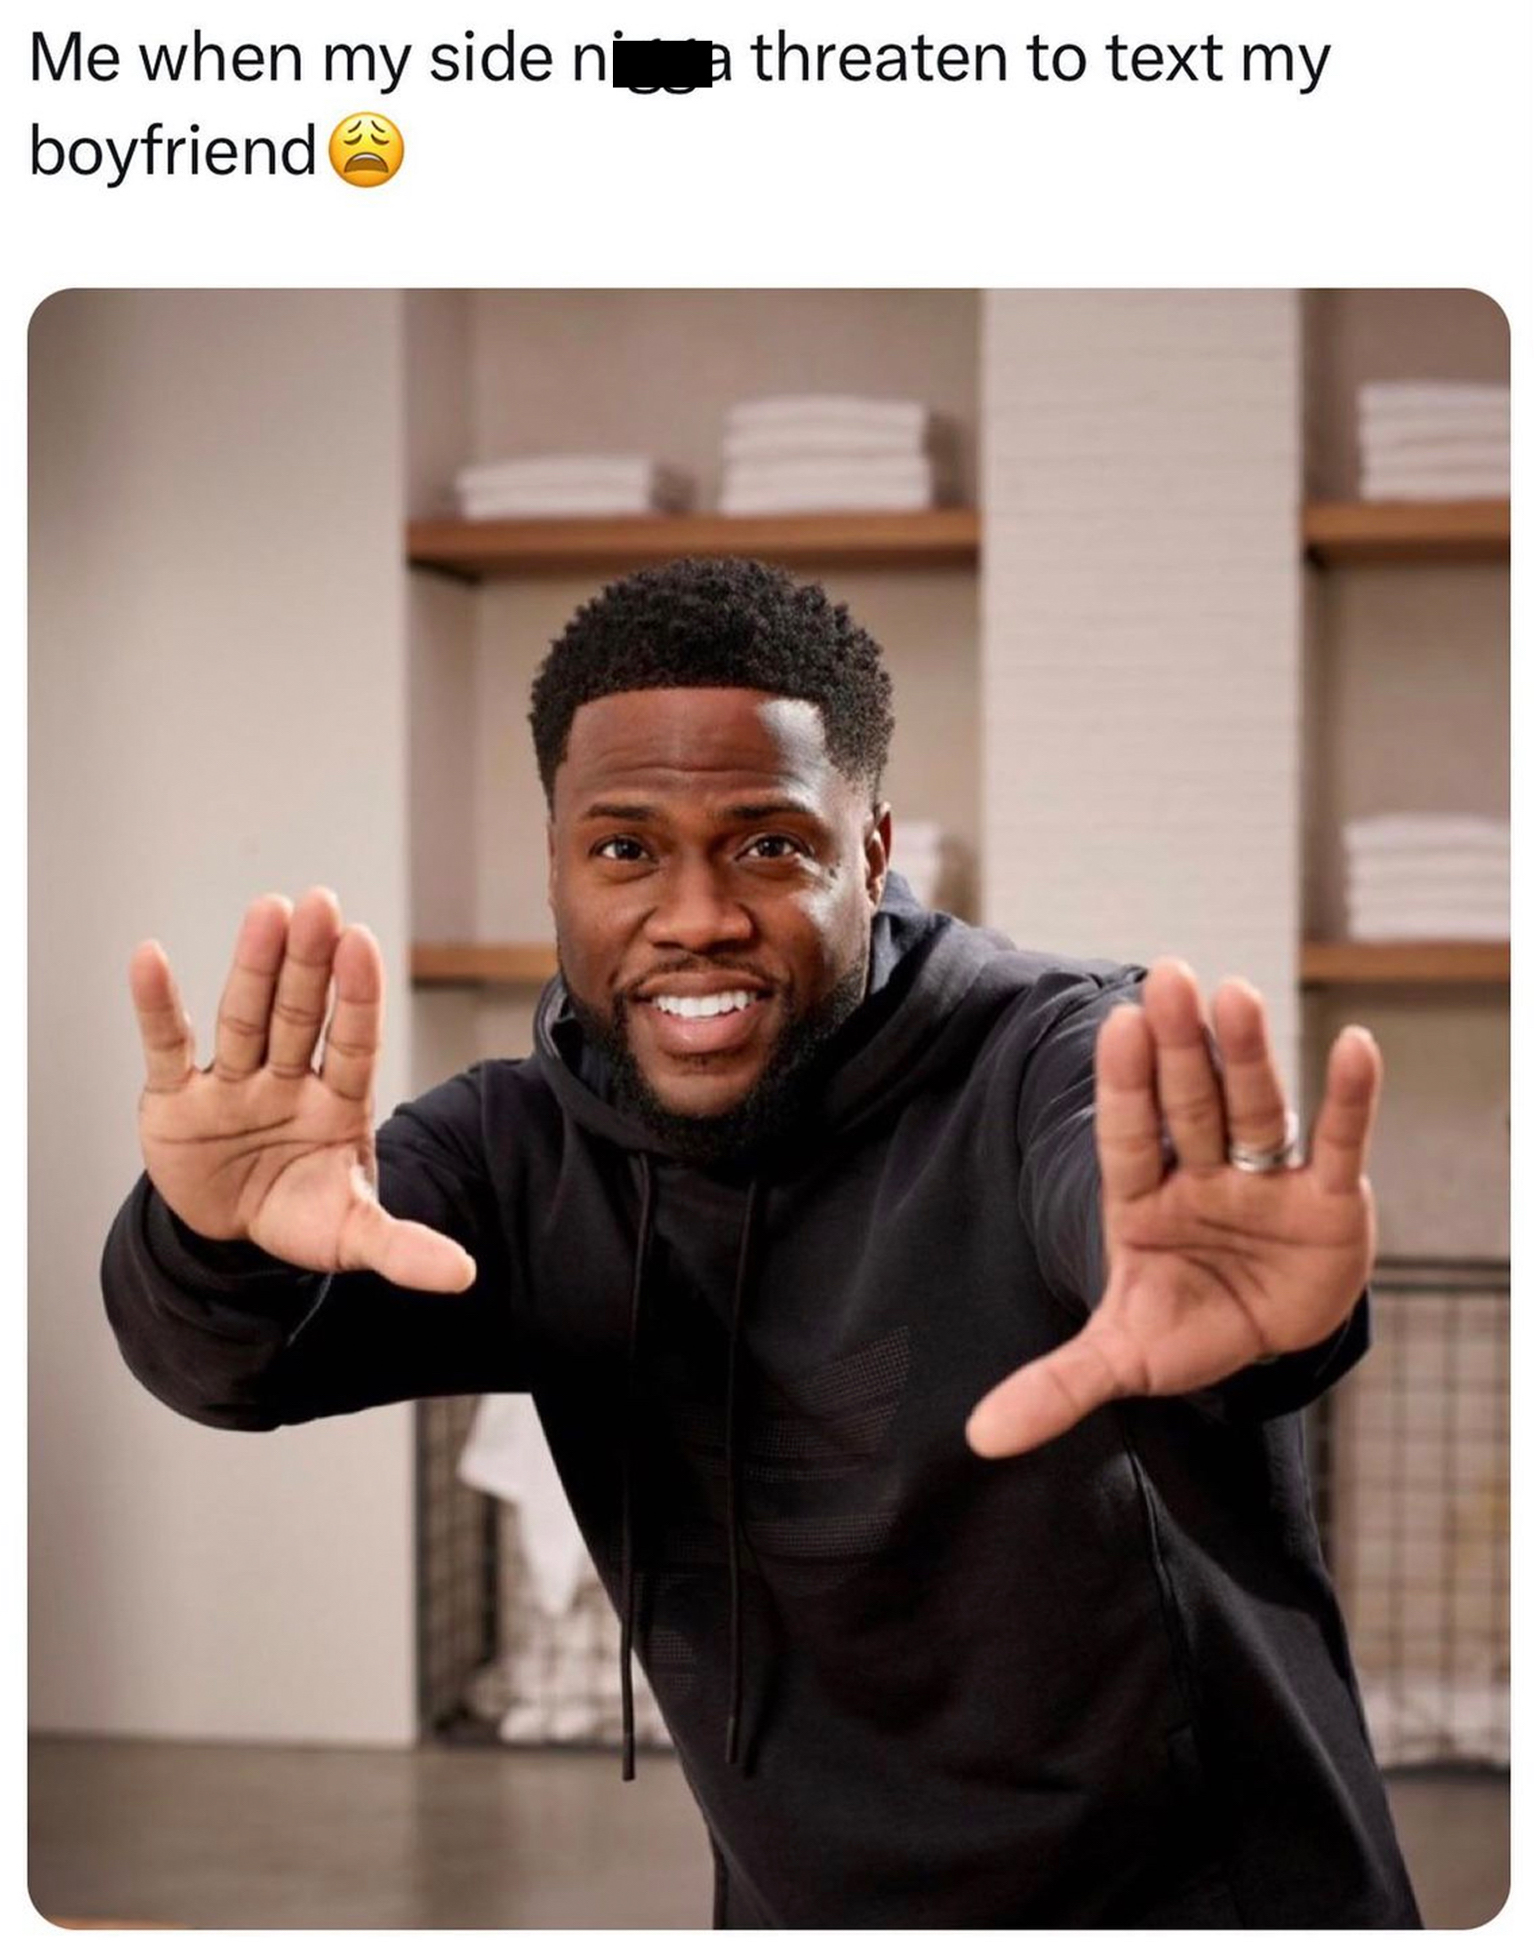 Kevin Hart Is Confused by All the Memes, So the Answered with